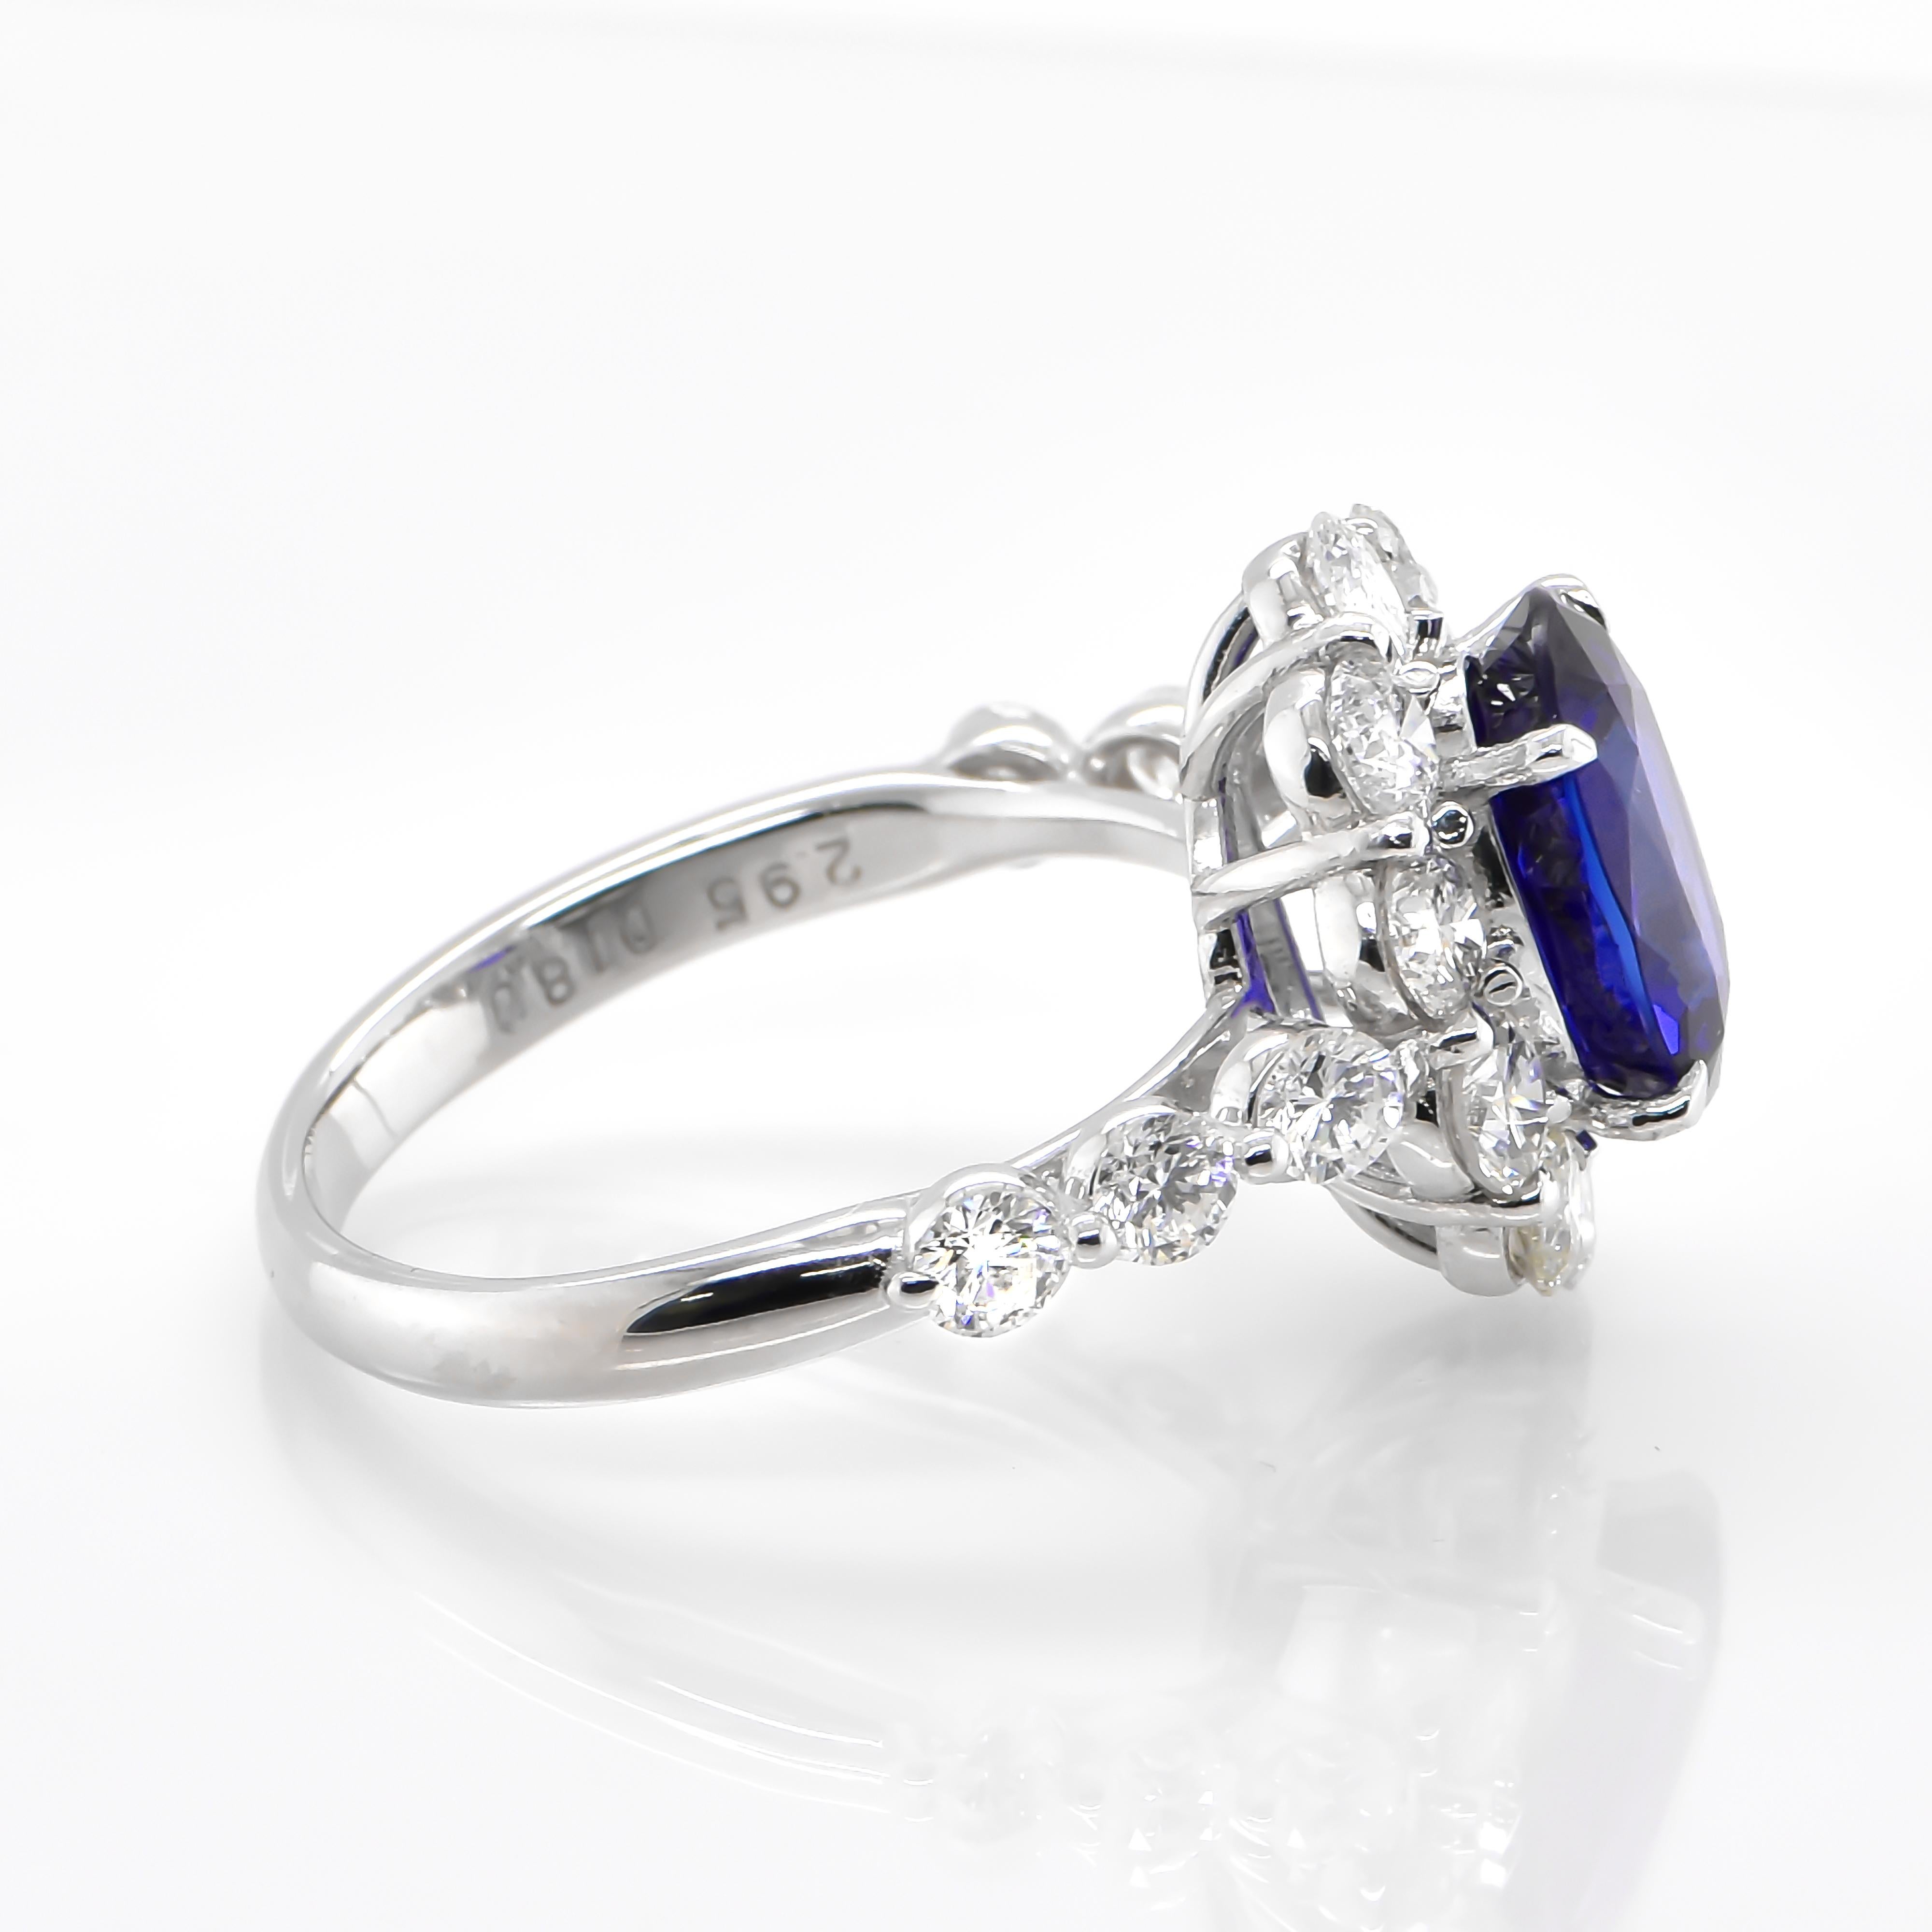 Oval Cut 2.95 Carat Natural Royal Blue Sapphire and Diamond Halo Ring Made in Platinum For Sale